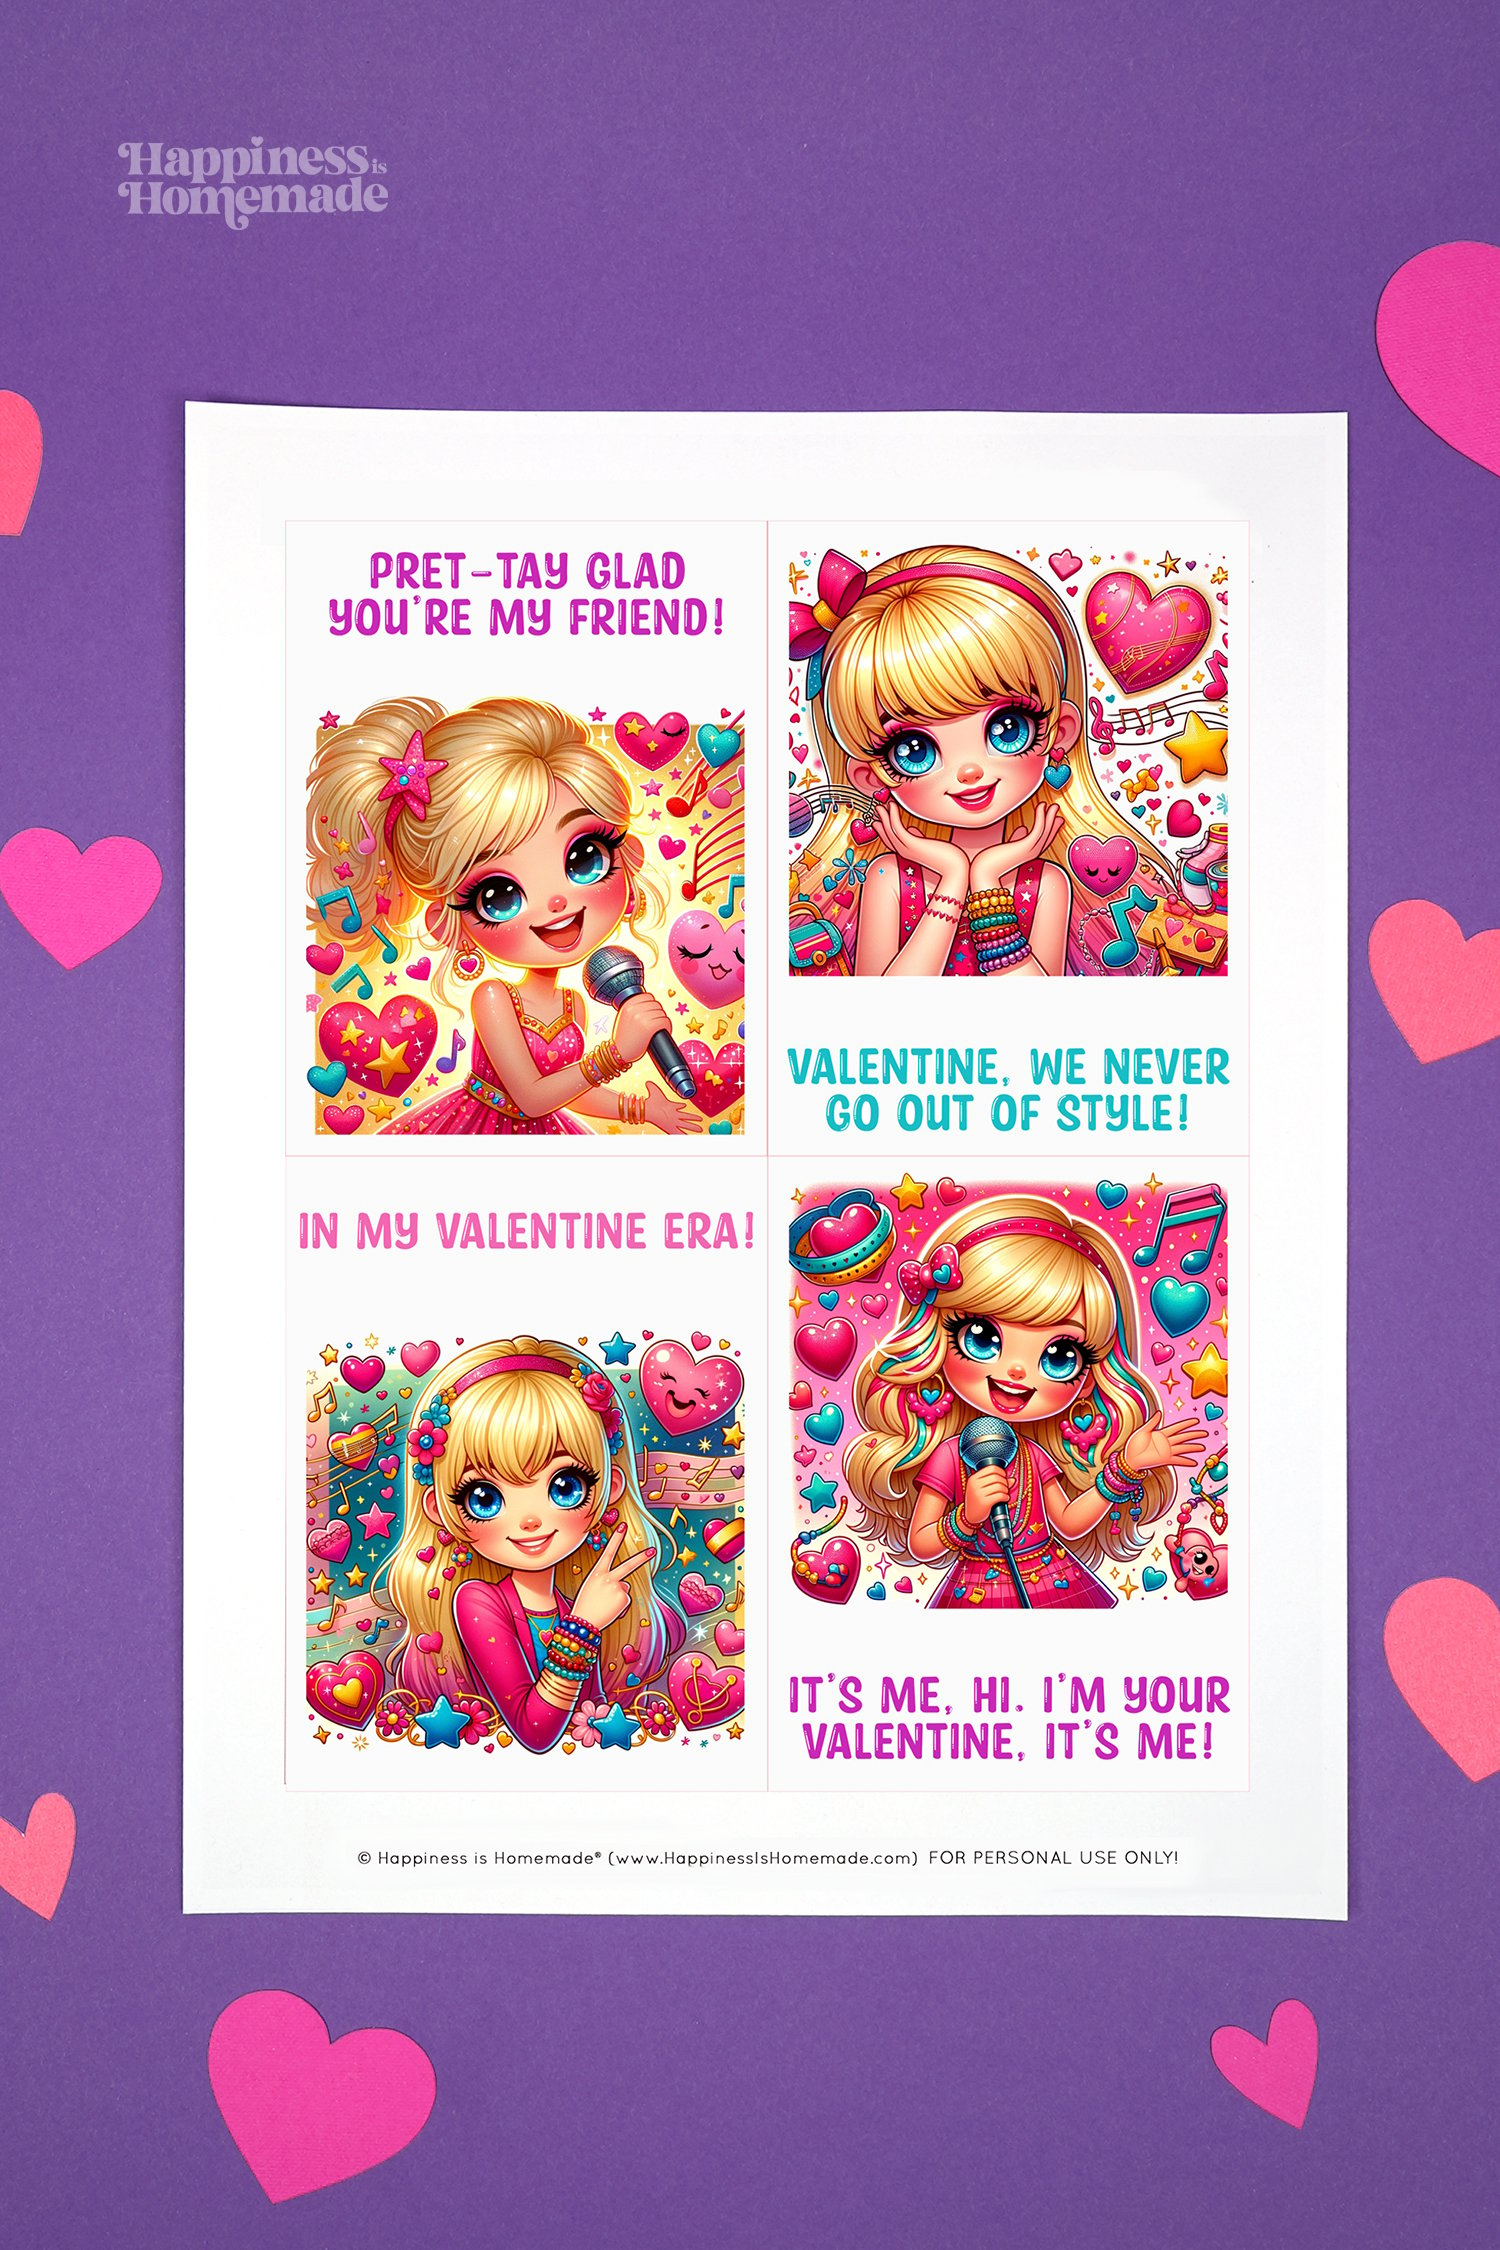 Sheet of printable Valentine's Day cards featuring a cartoon blonde pop star with blue eyes, musical accessories, and captions featuring Taylor Swift lyrics.